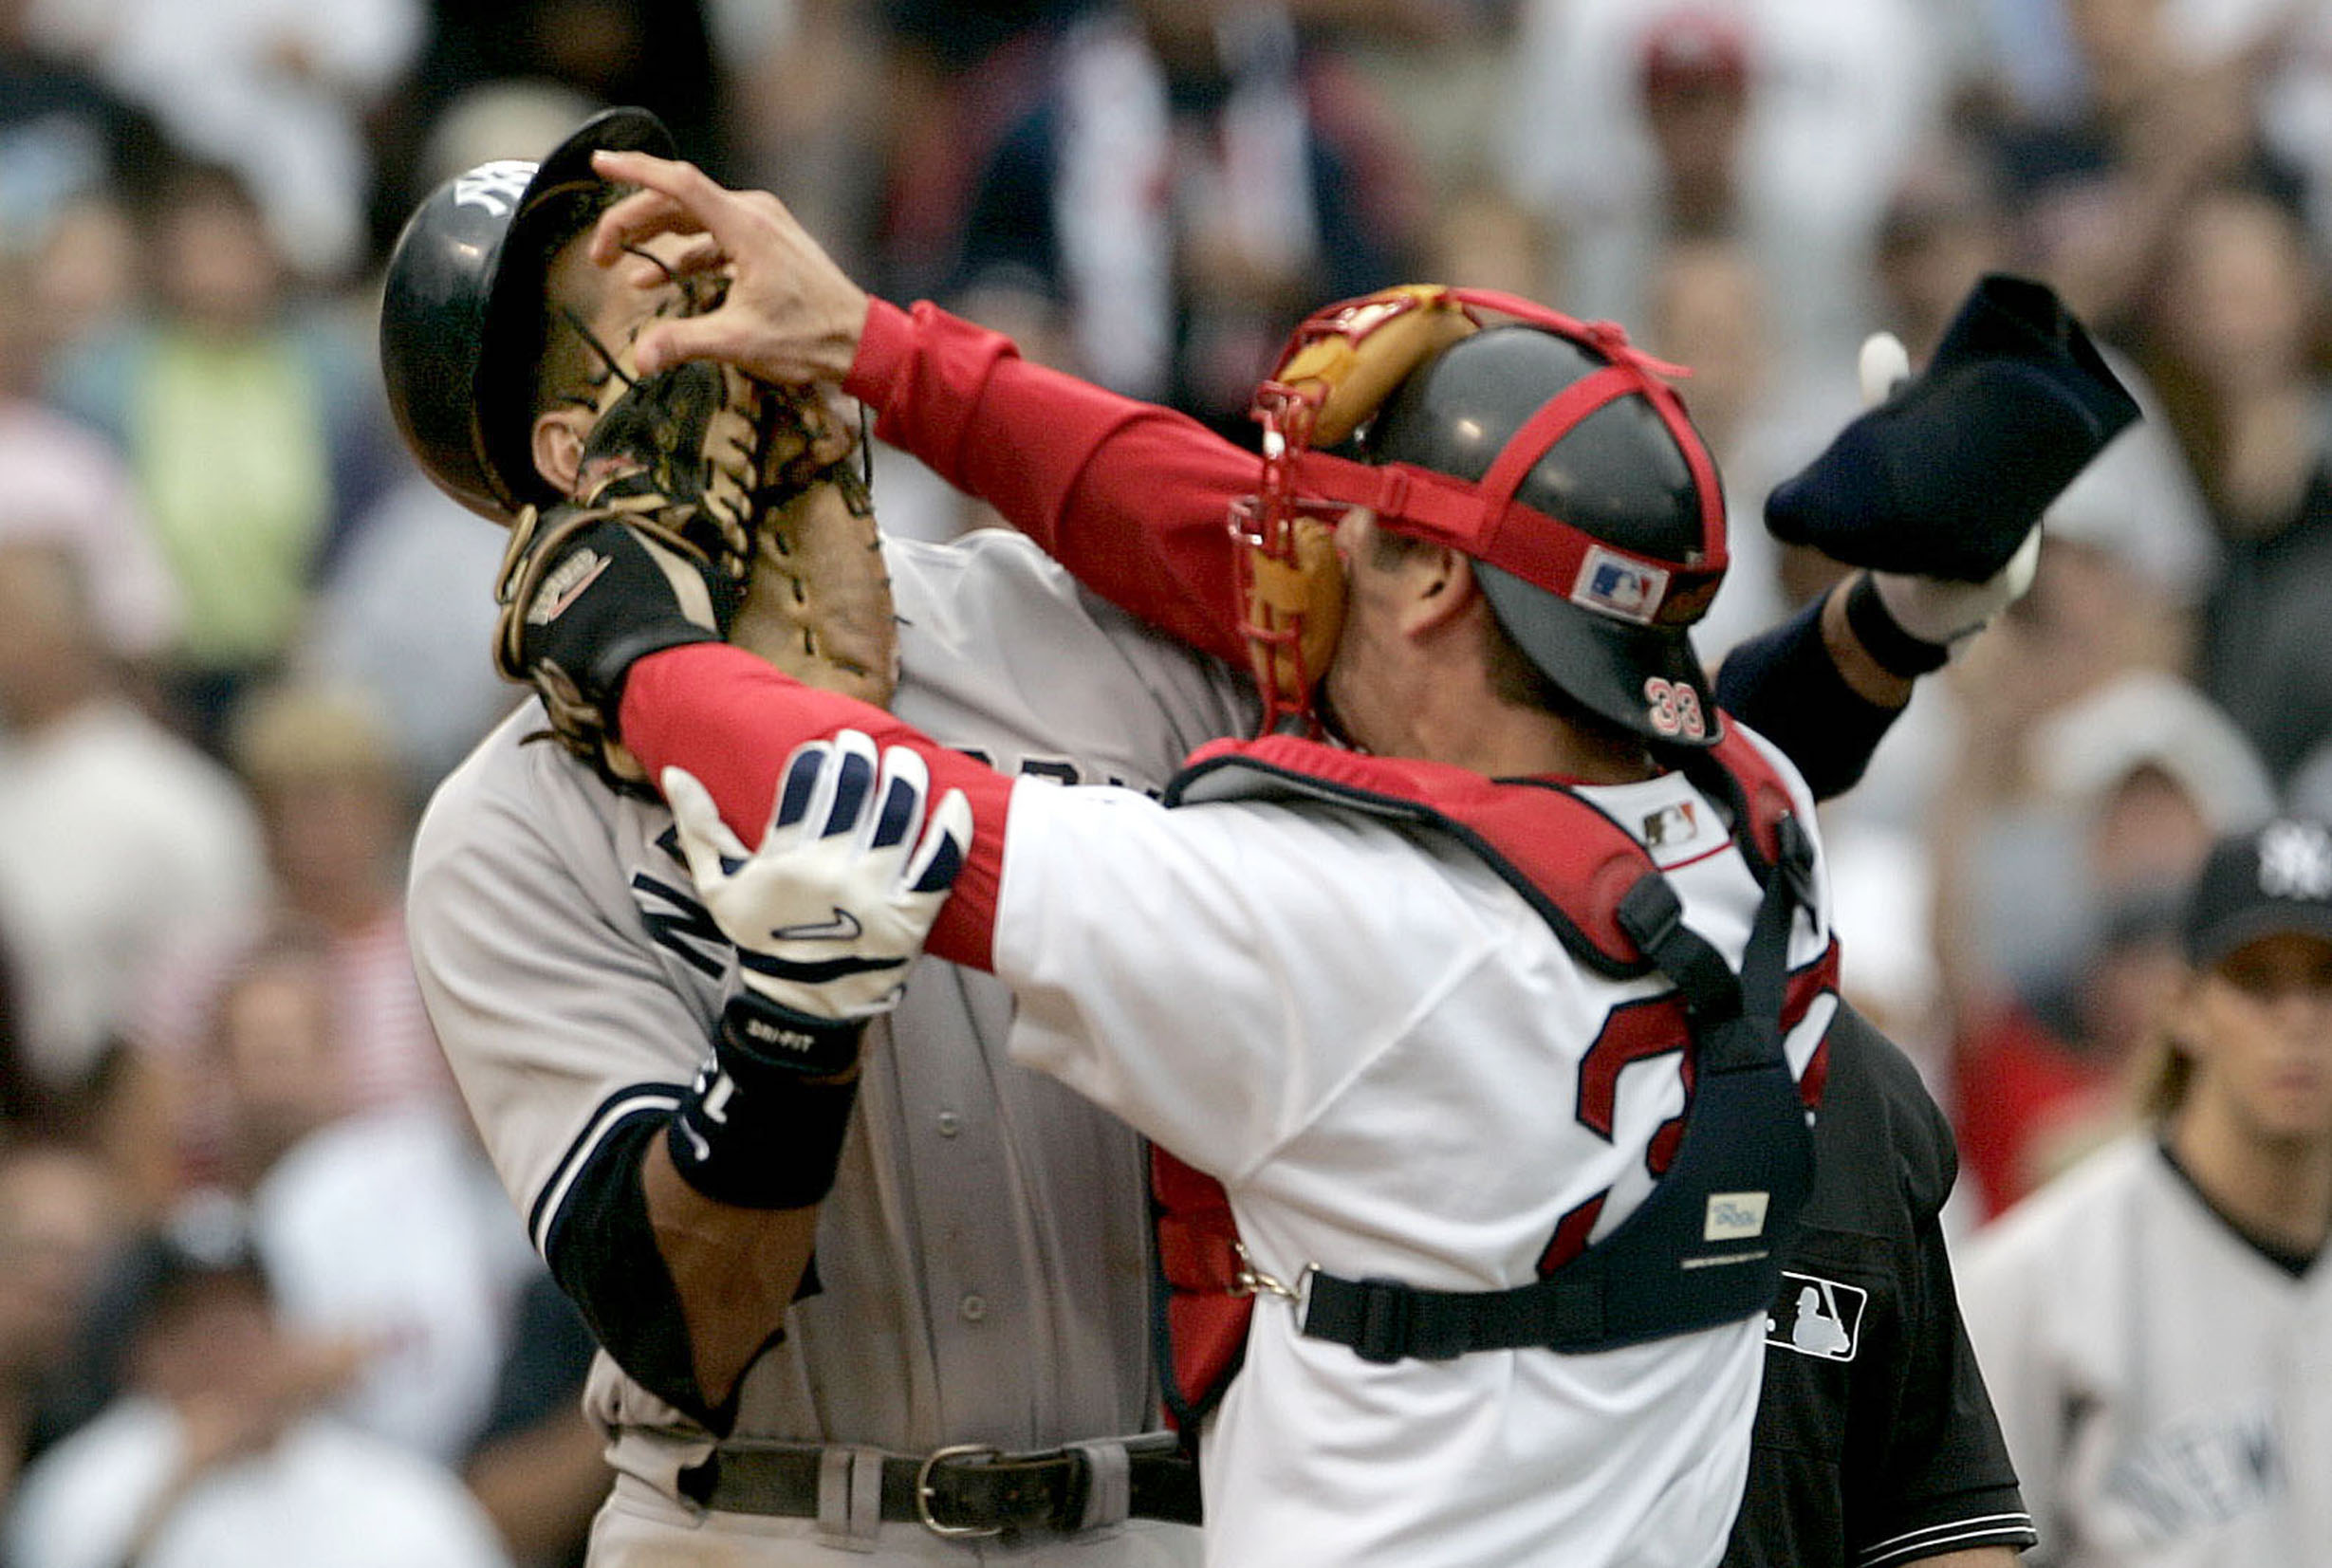 New York Yankees burn the Red Sox for reminiscing about 2004